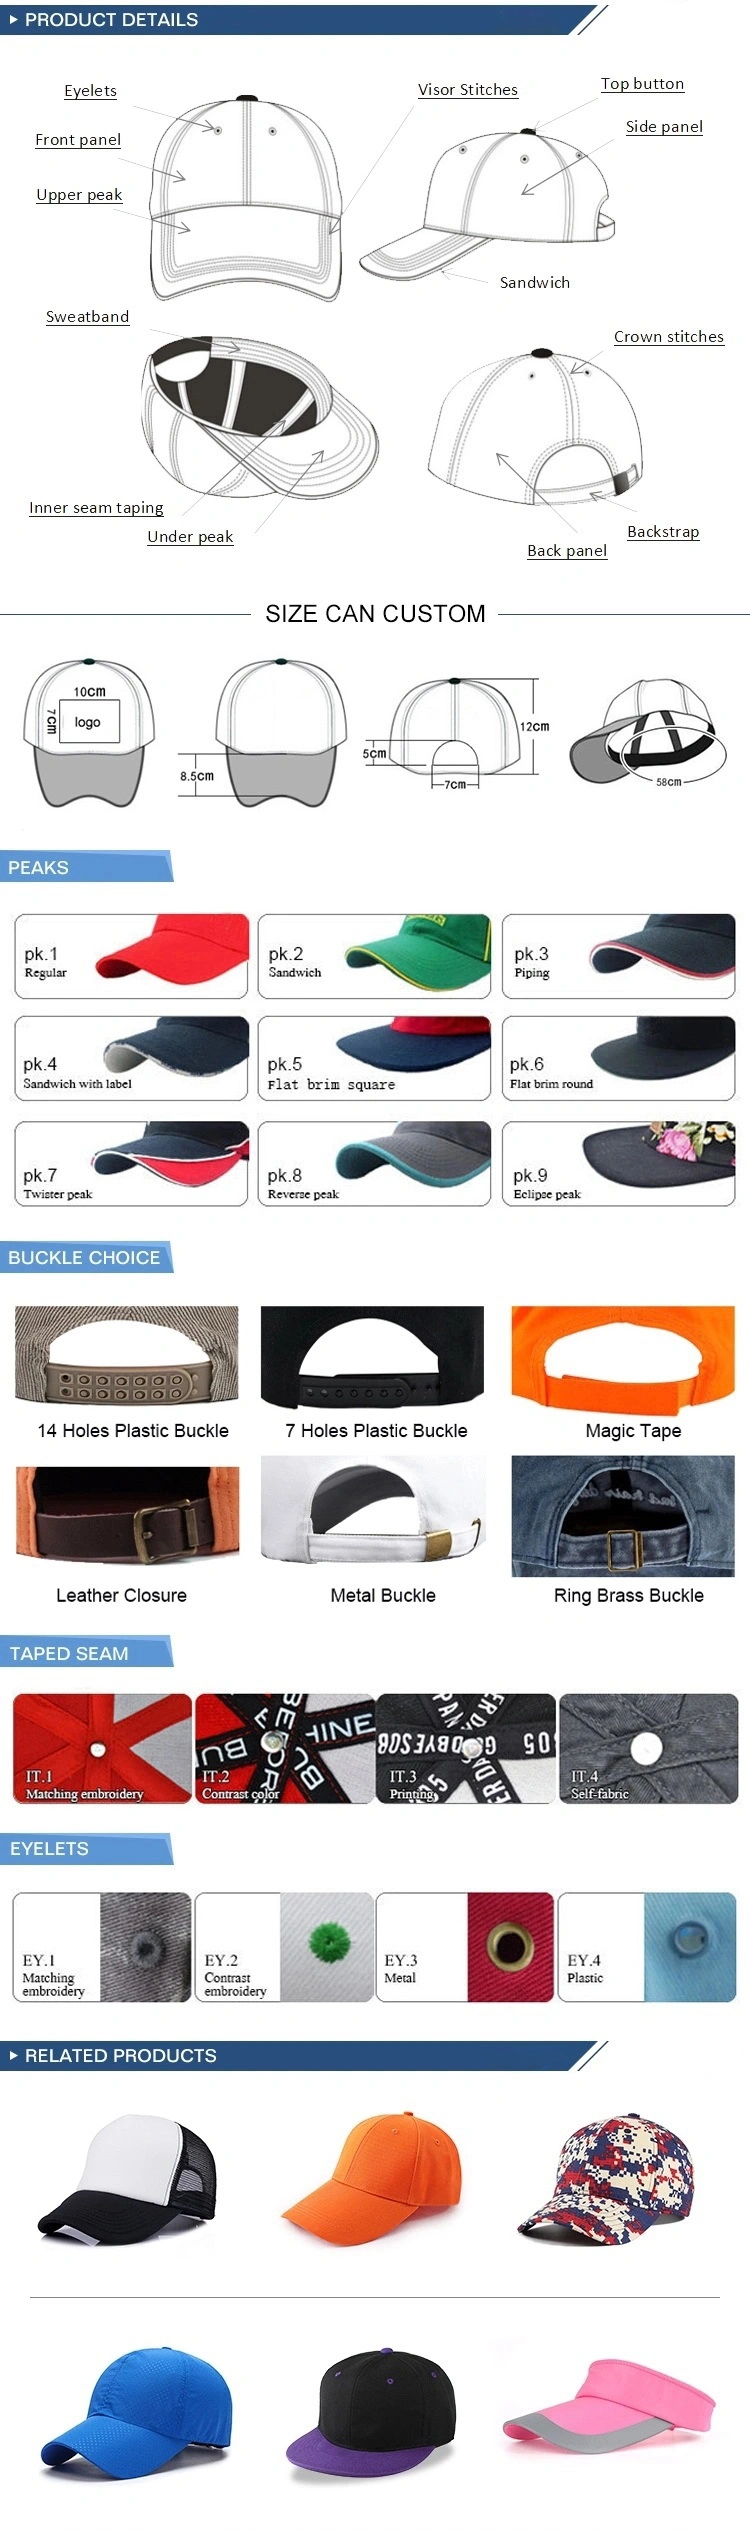 Quick-Drying Fabric Customized Full-Print Embroidered Mesh Cap